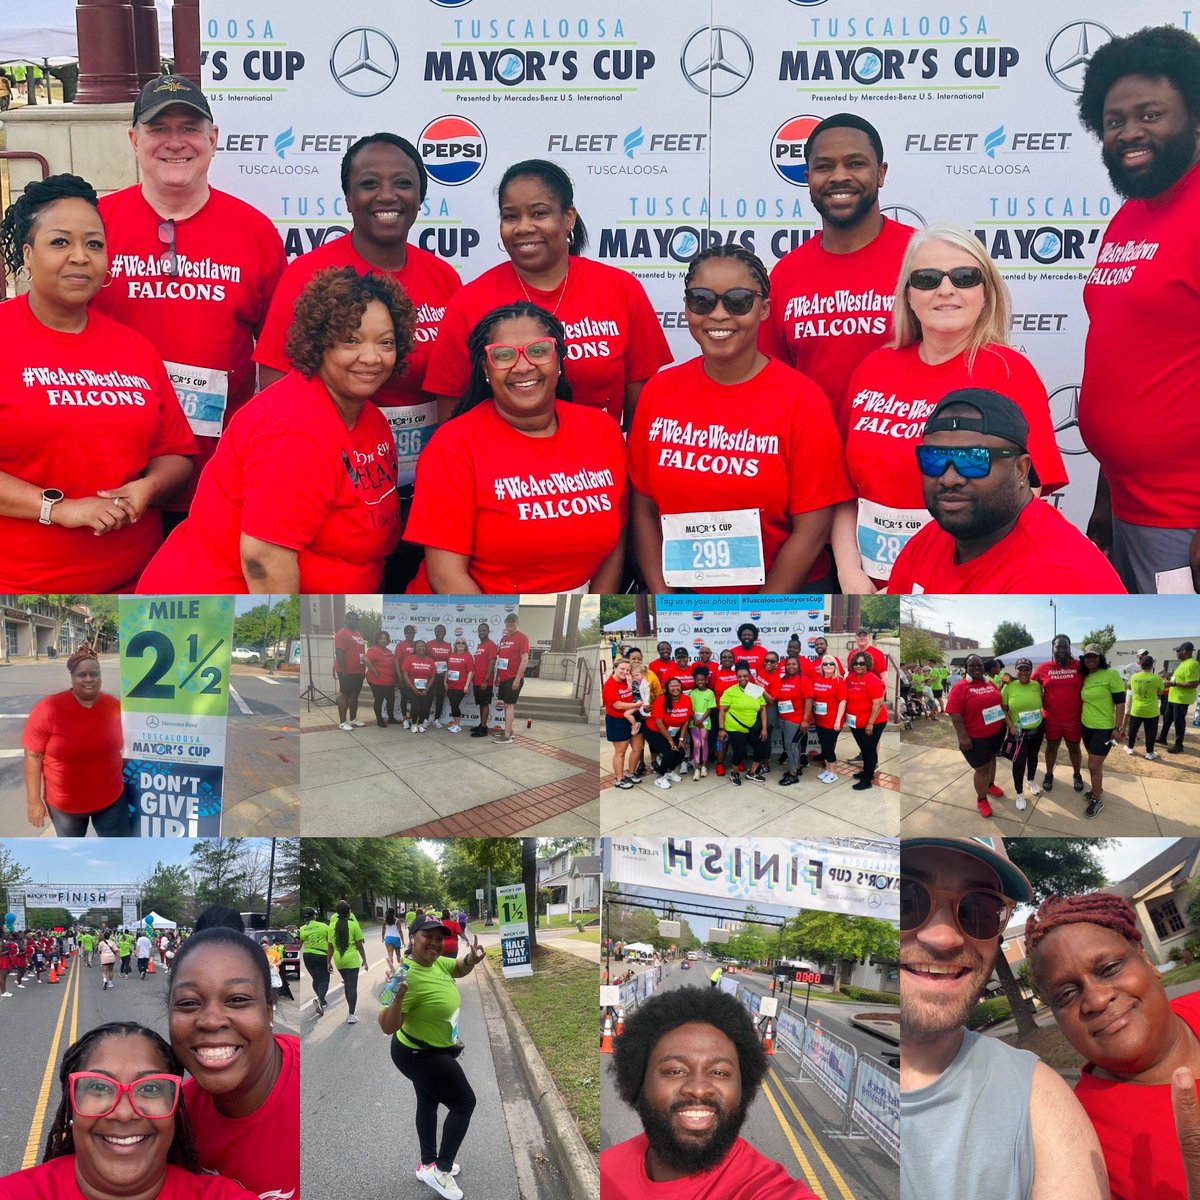 The Mayor's Cup is a simple, fun way for the entire community to get together and get involved in supporting education. What a great way to spend a beautiful Saturday morning! #WestlawnTCS #TCSLearns #FalconPride #AmazingtotheCore #FalconStrong @TCSBoardofEd